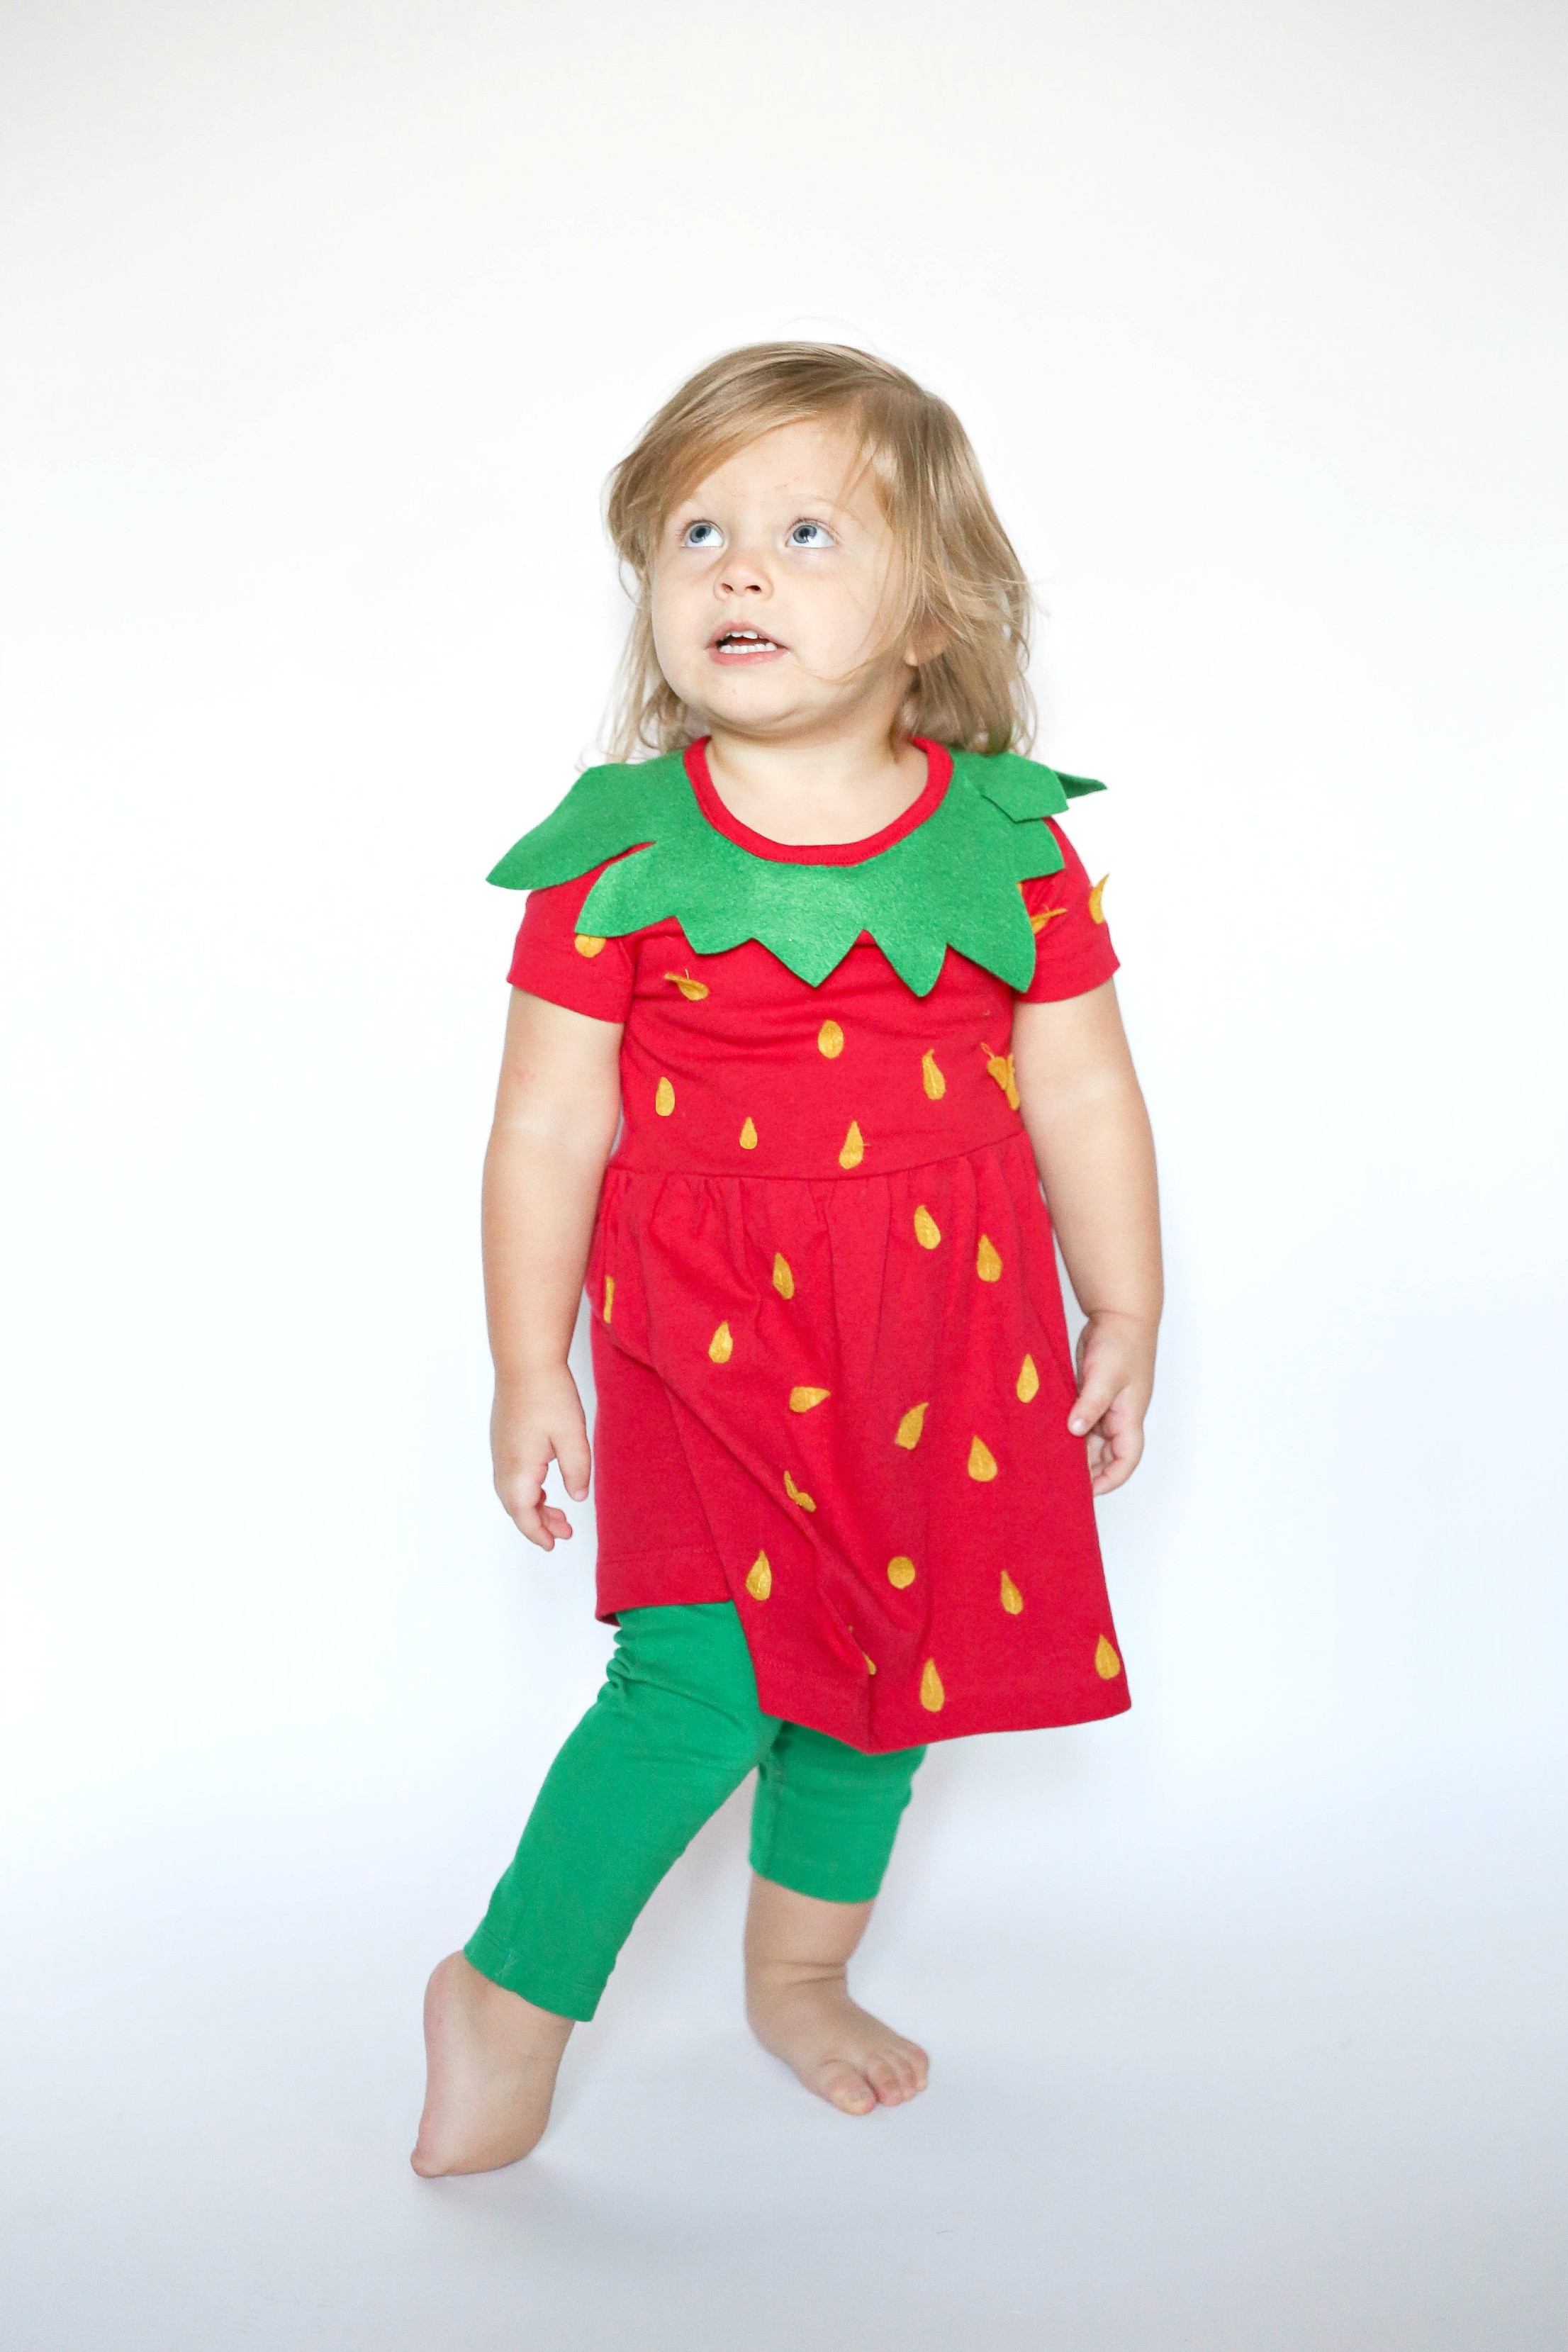 DIY Costumes For Toddlers
 Group Fruit Costume for Kids TaylorMade